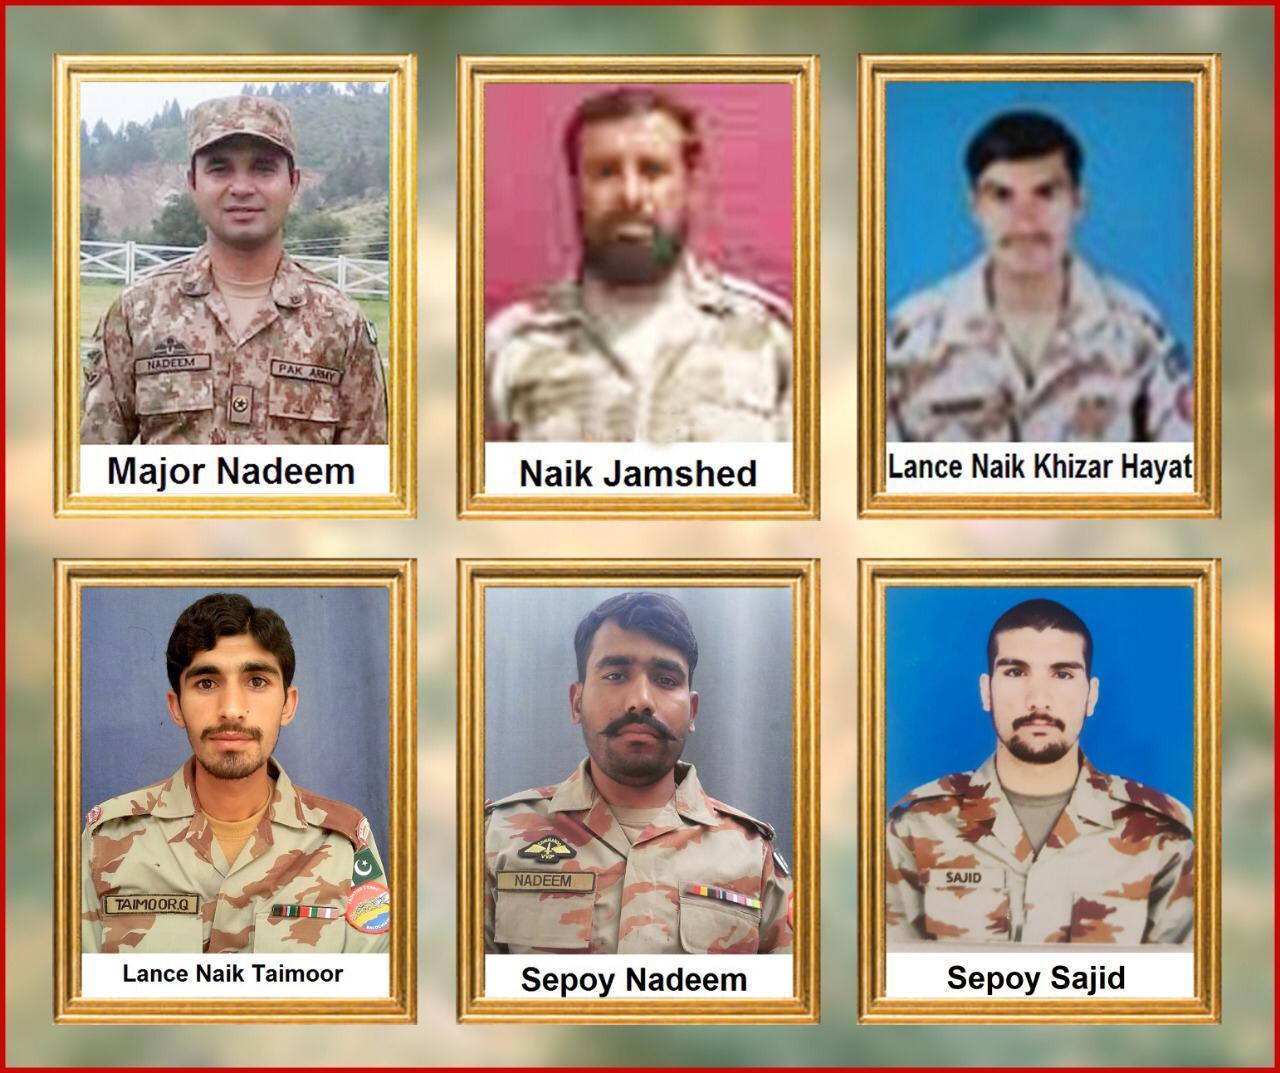 One officer and soldiers of Pakistan Army martyred in Balochistan 